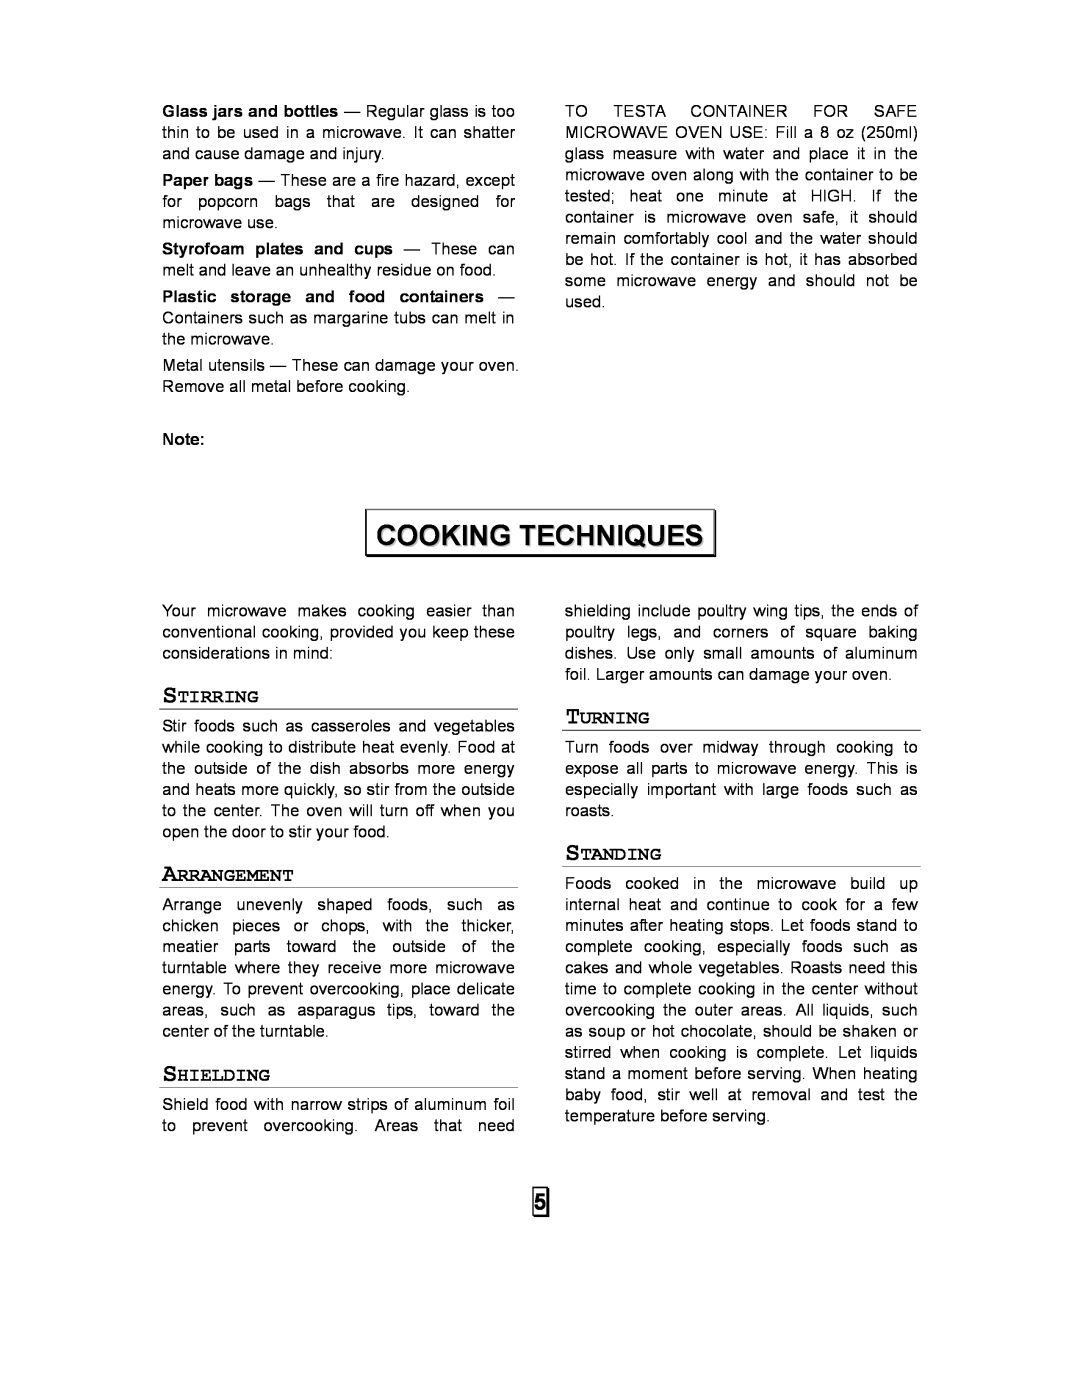 Sears 86030 user manual Cooking Techniques, Stirring, Arrangement, Shielding, Turning, Standing 